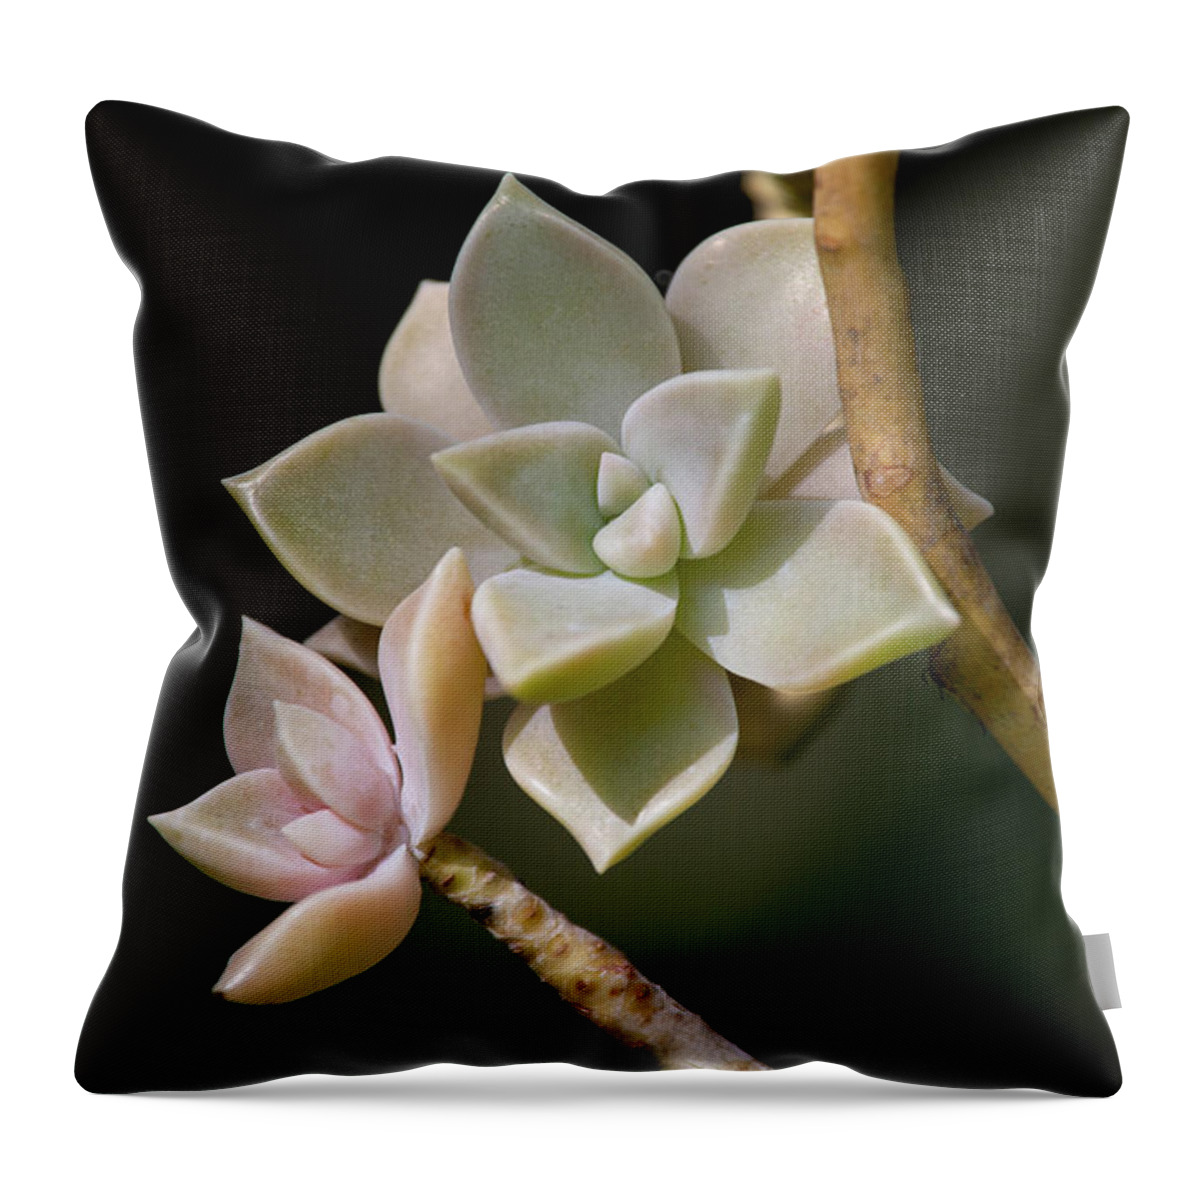 Plants Throw Pillow featuring the photograph Ghost Plant by Dale Kincaid